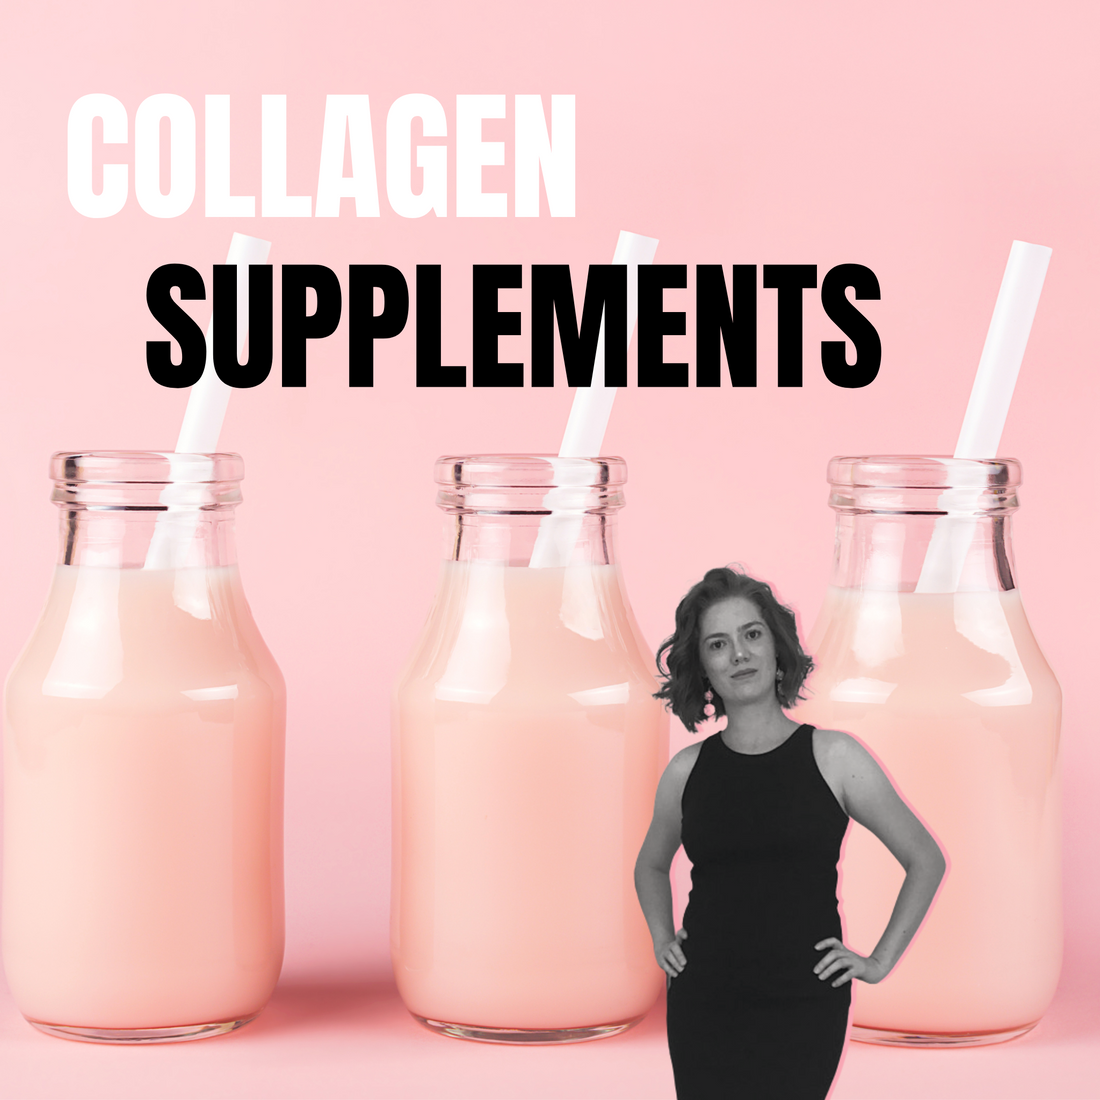 All you need to know about collagen supplements for your skin